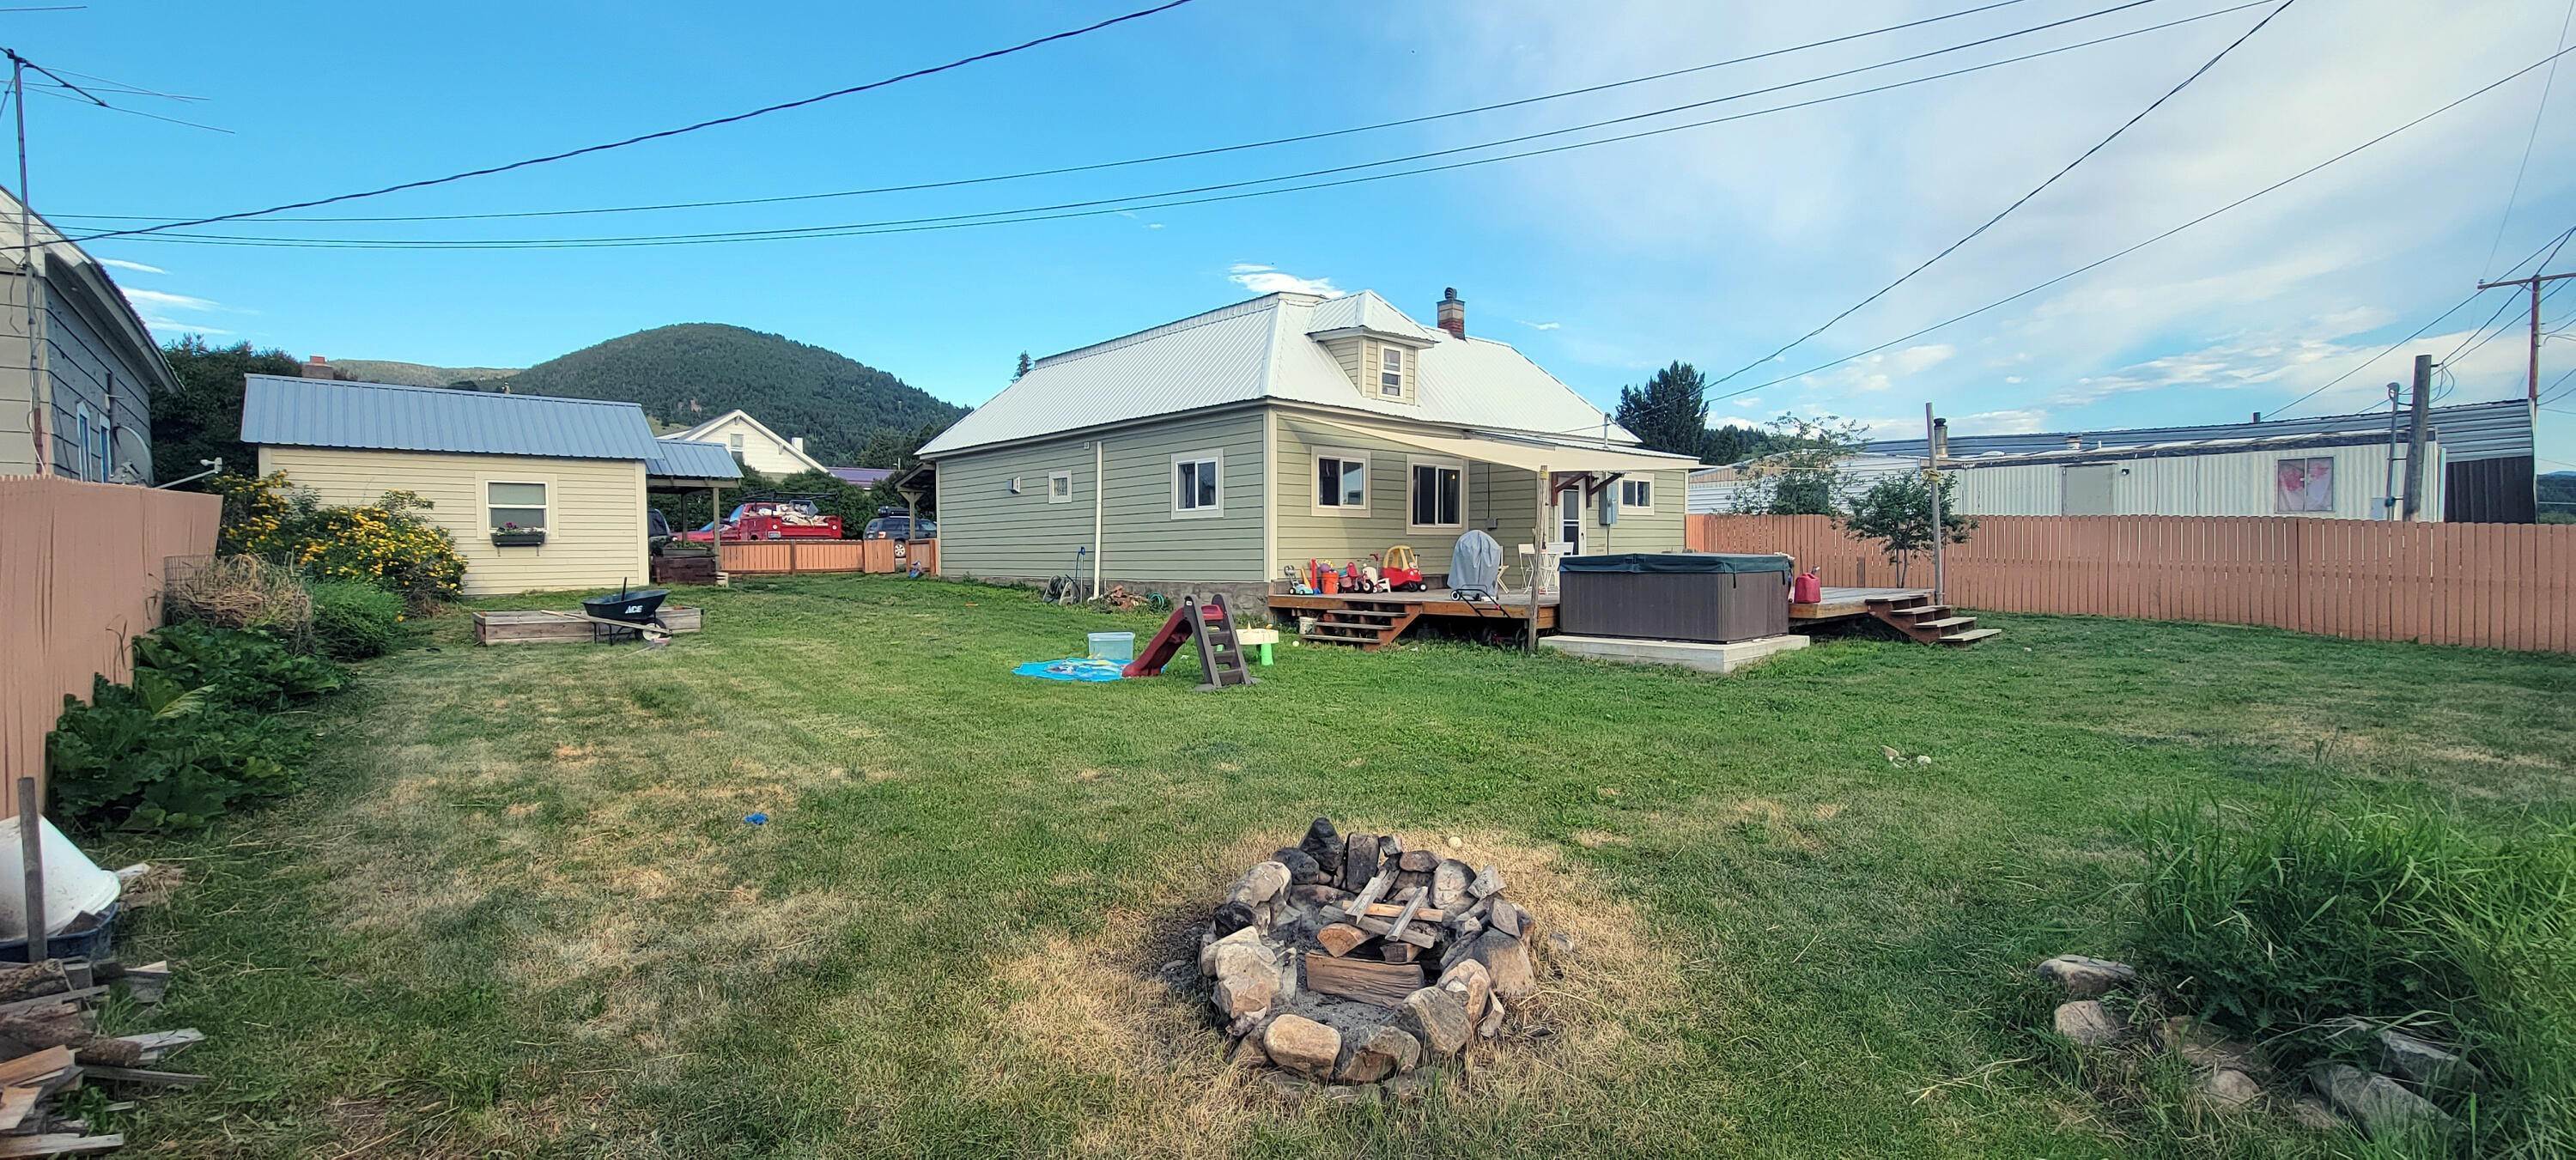 16. Single Family Homes for Sale at 921 Main Street, Philipsburg, Montana 59858 United States